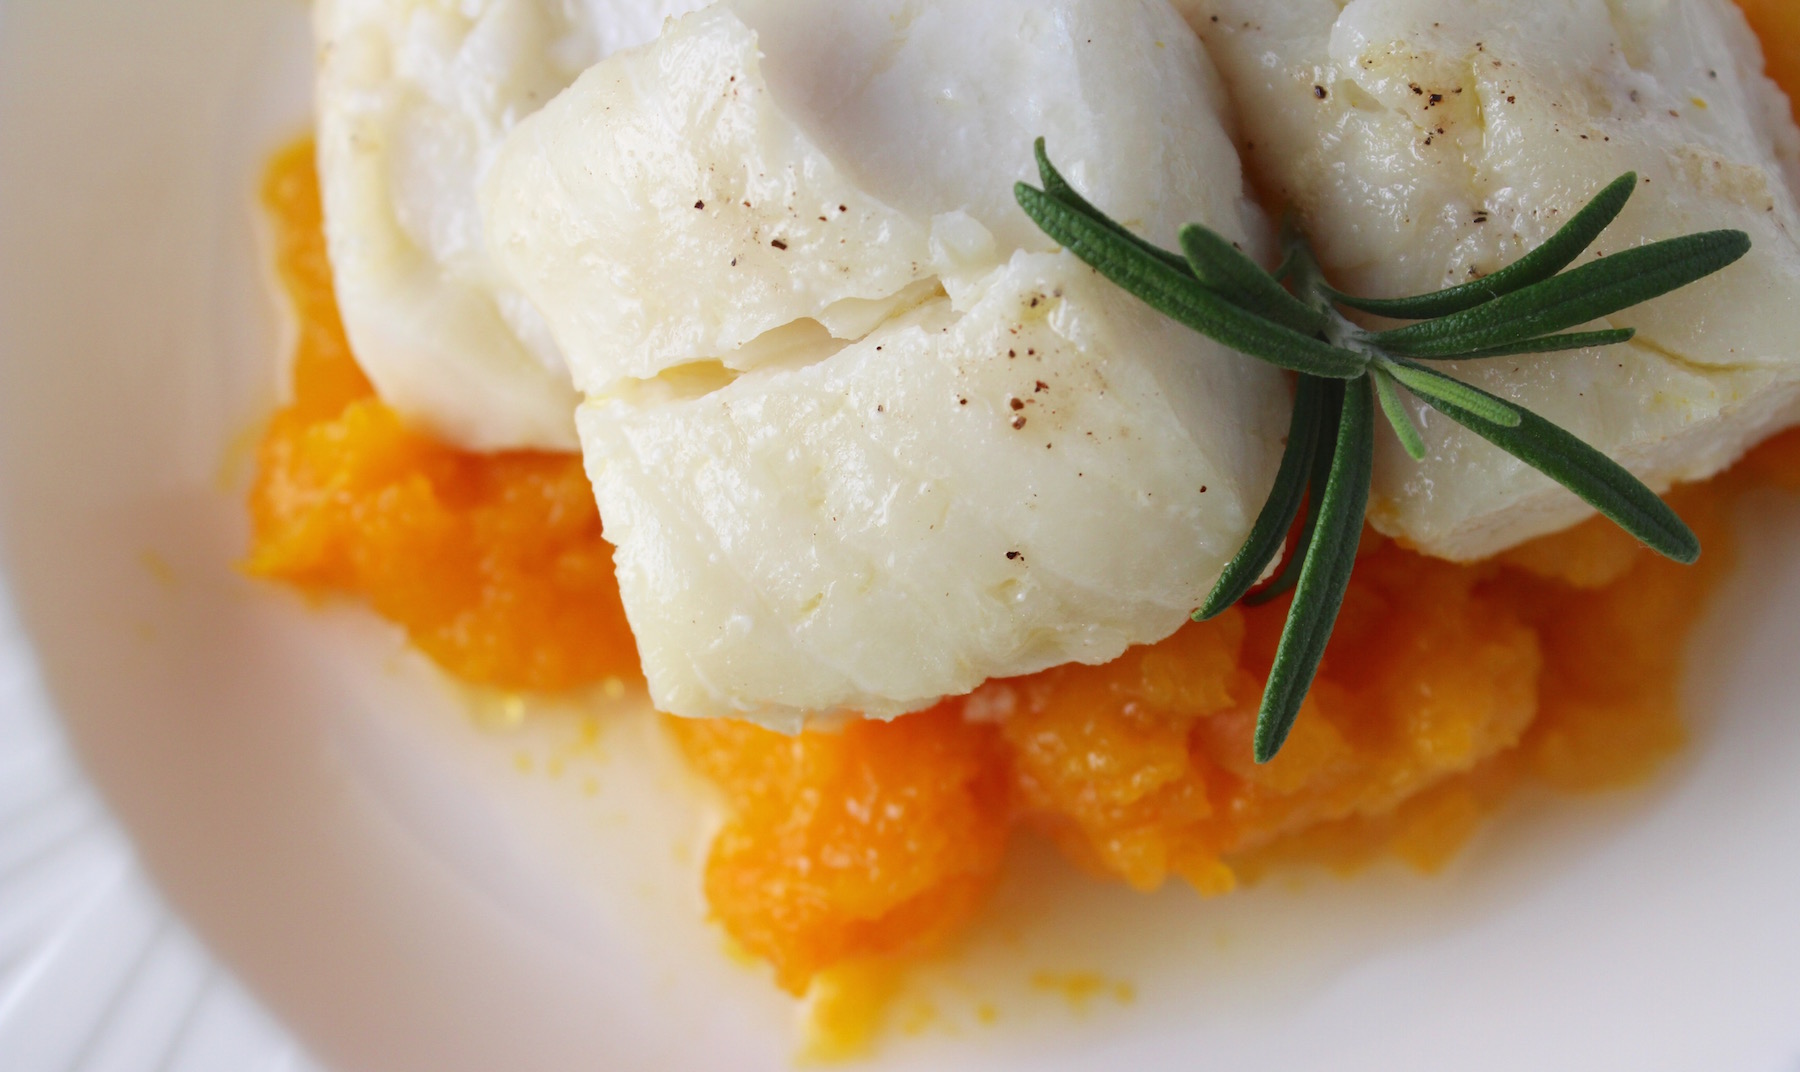 Cod Poached in Rosemary Olive Oil